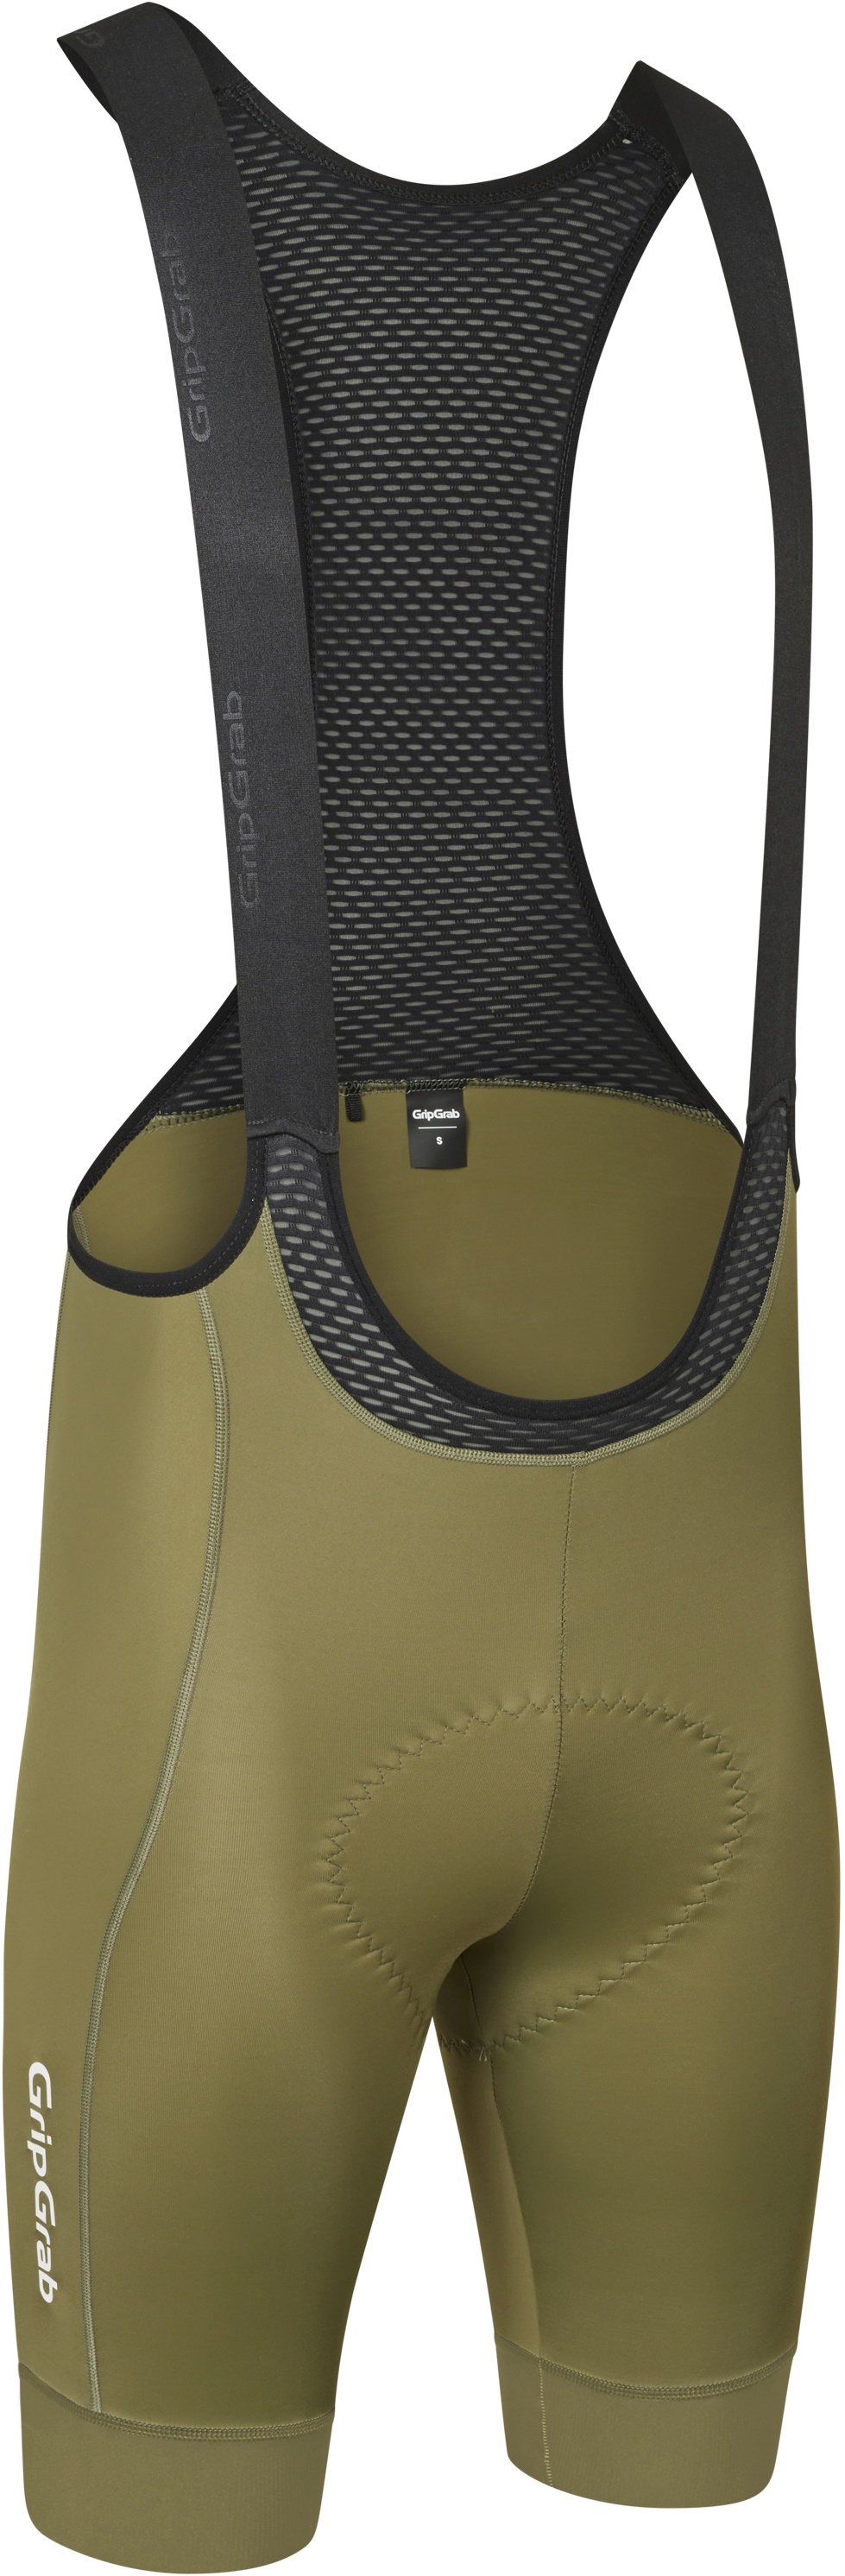  - GripGrab Pace bibshorts - Olive Green